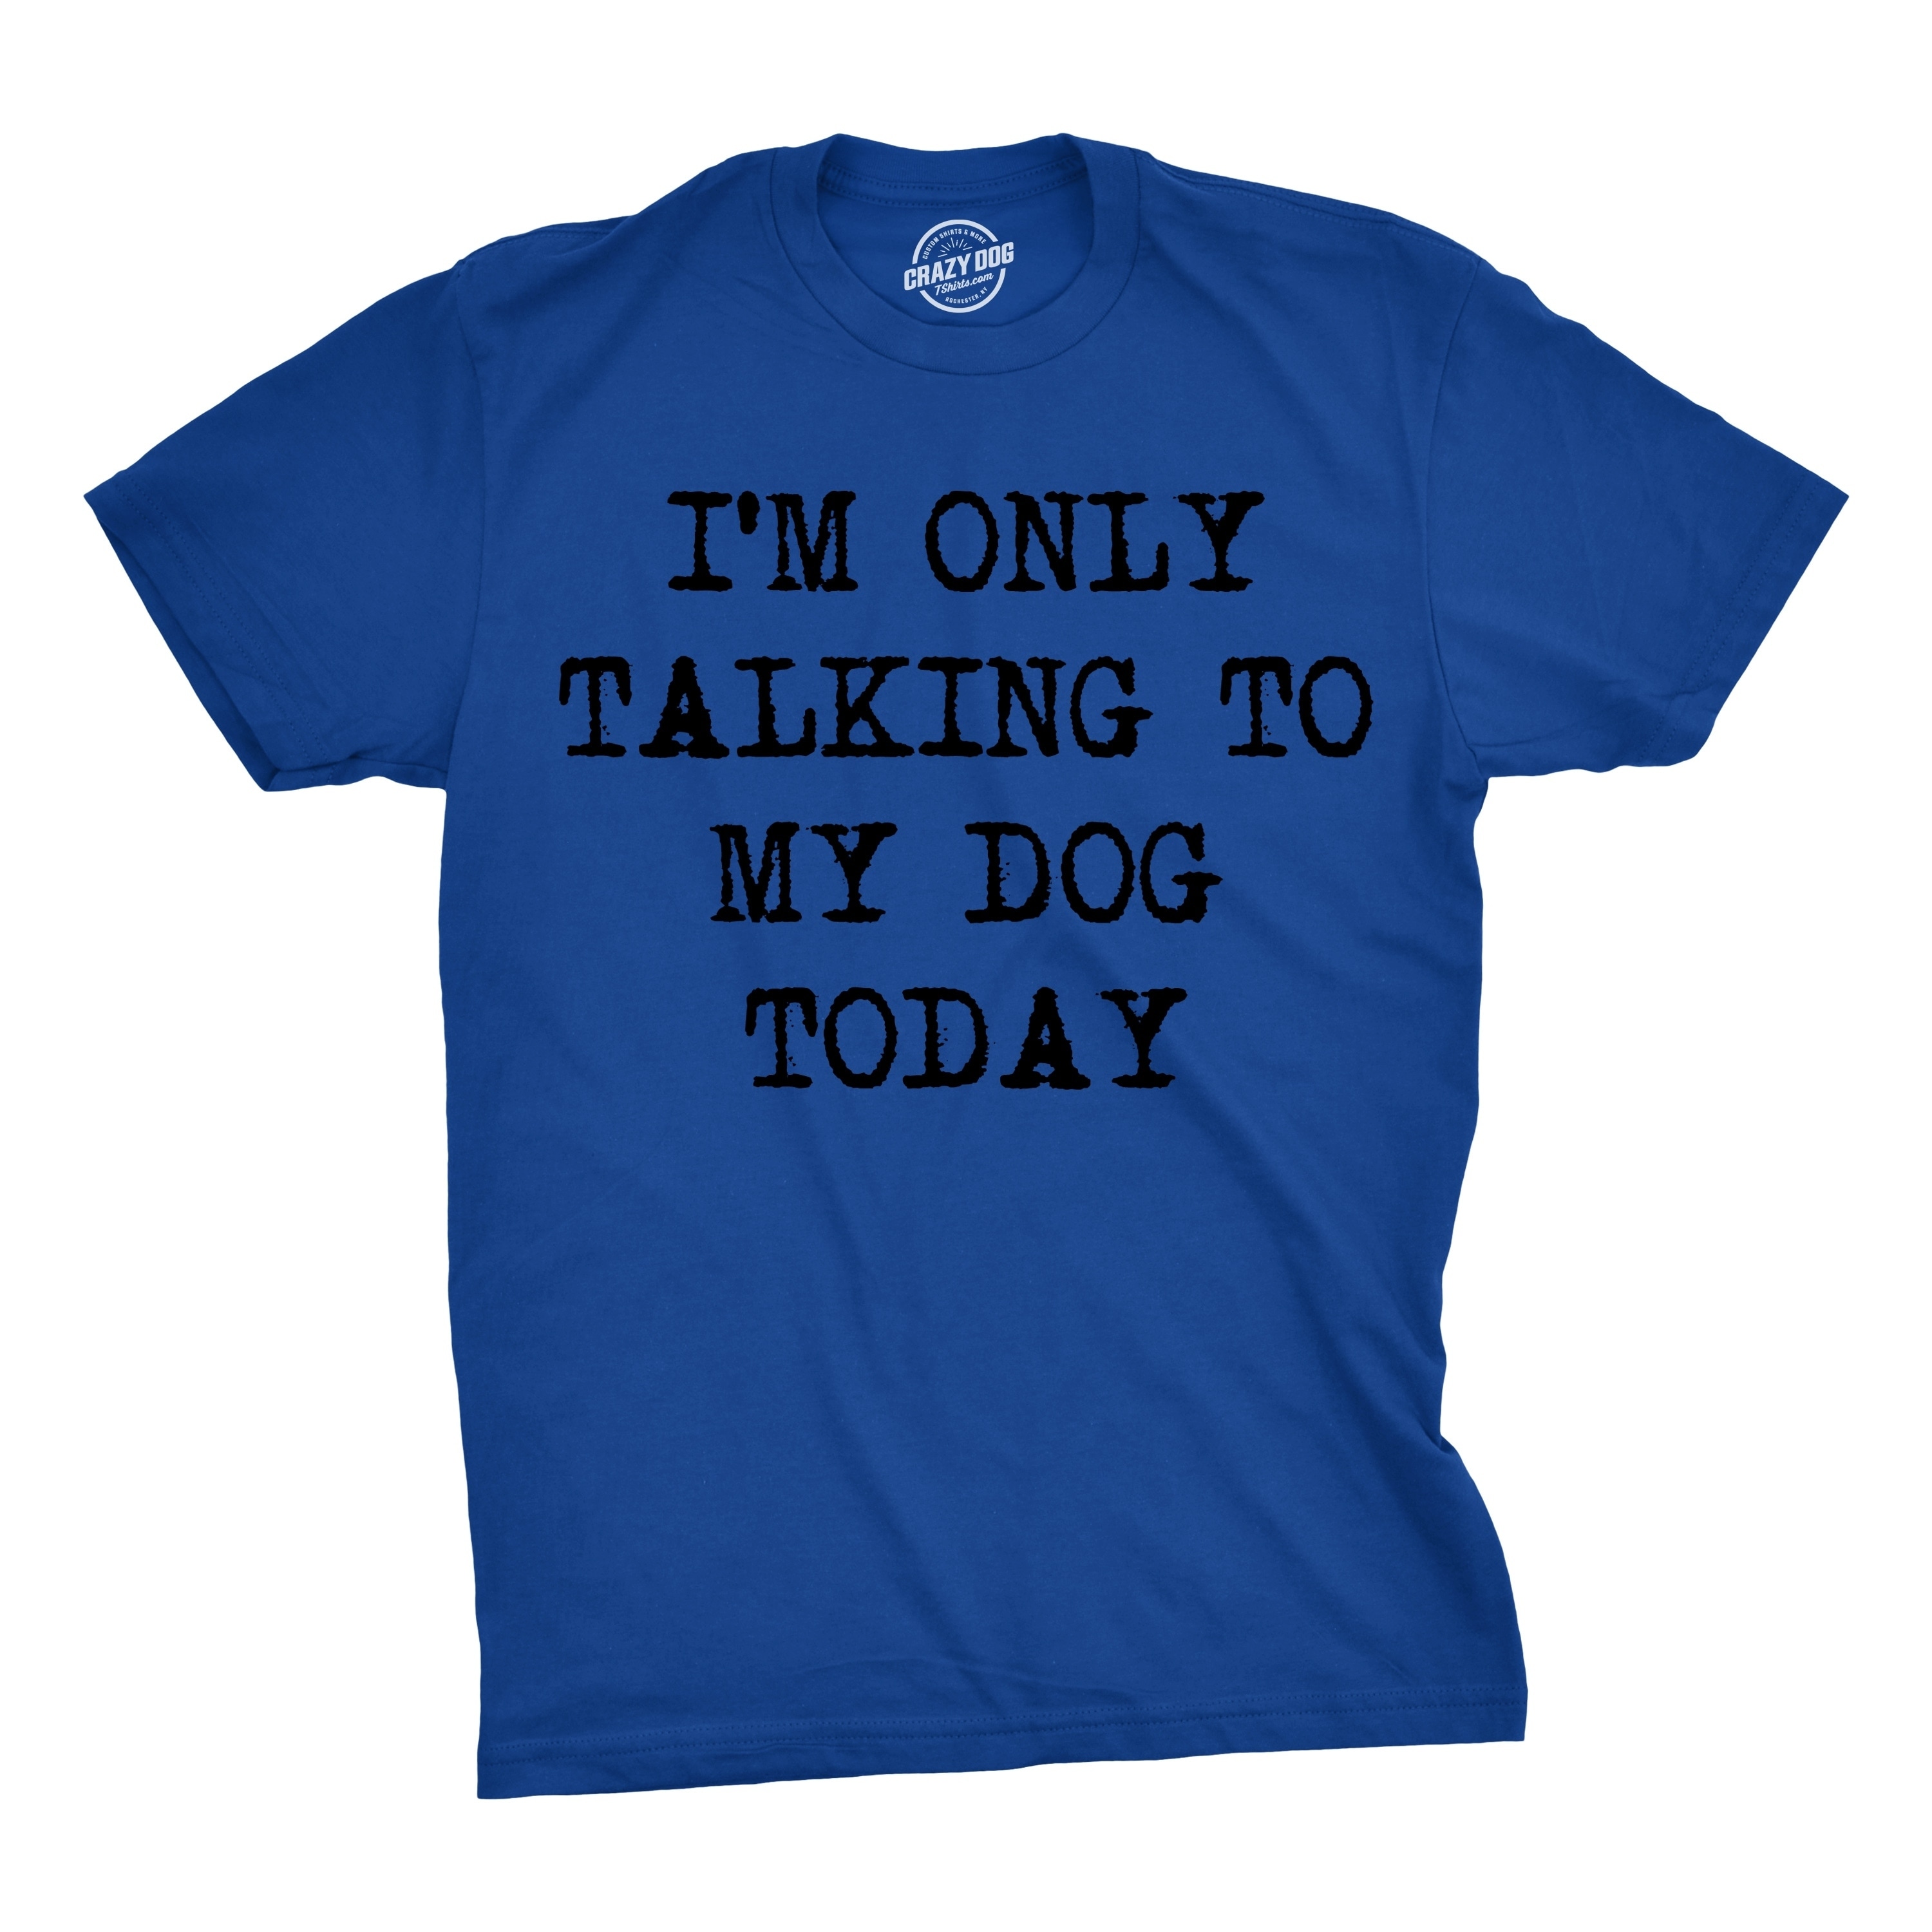 Mens Only Talking To My Dog Today Funny Shirts Dog Lovers Novelty Cool T shirt (Royal Blue)